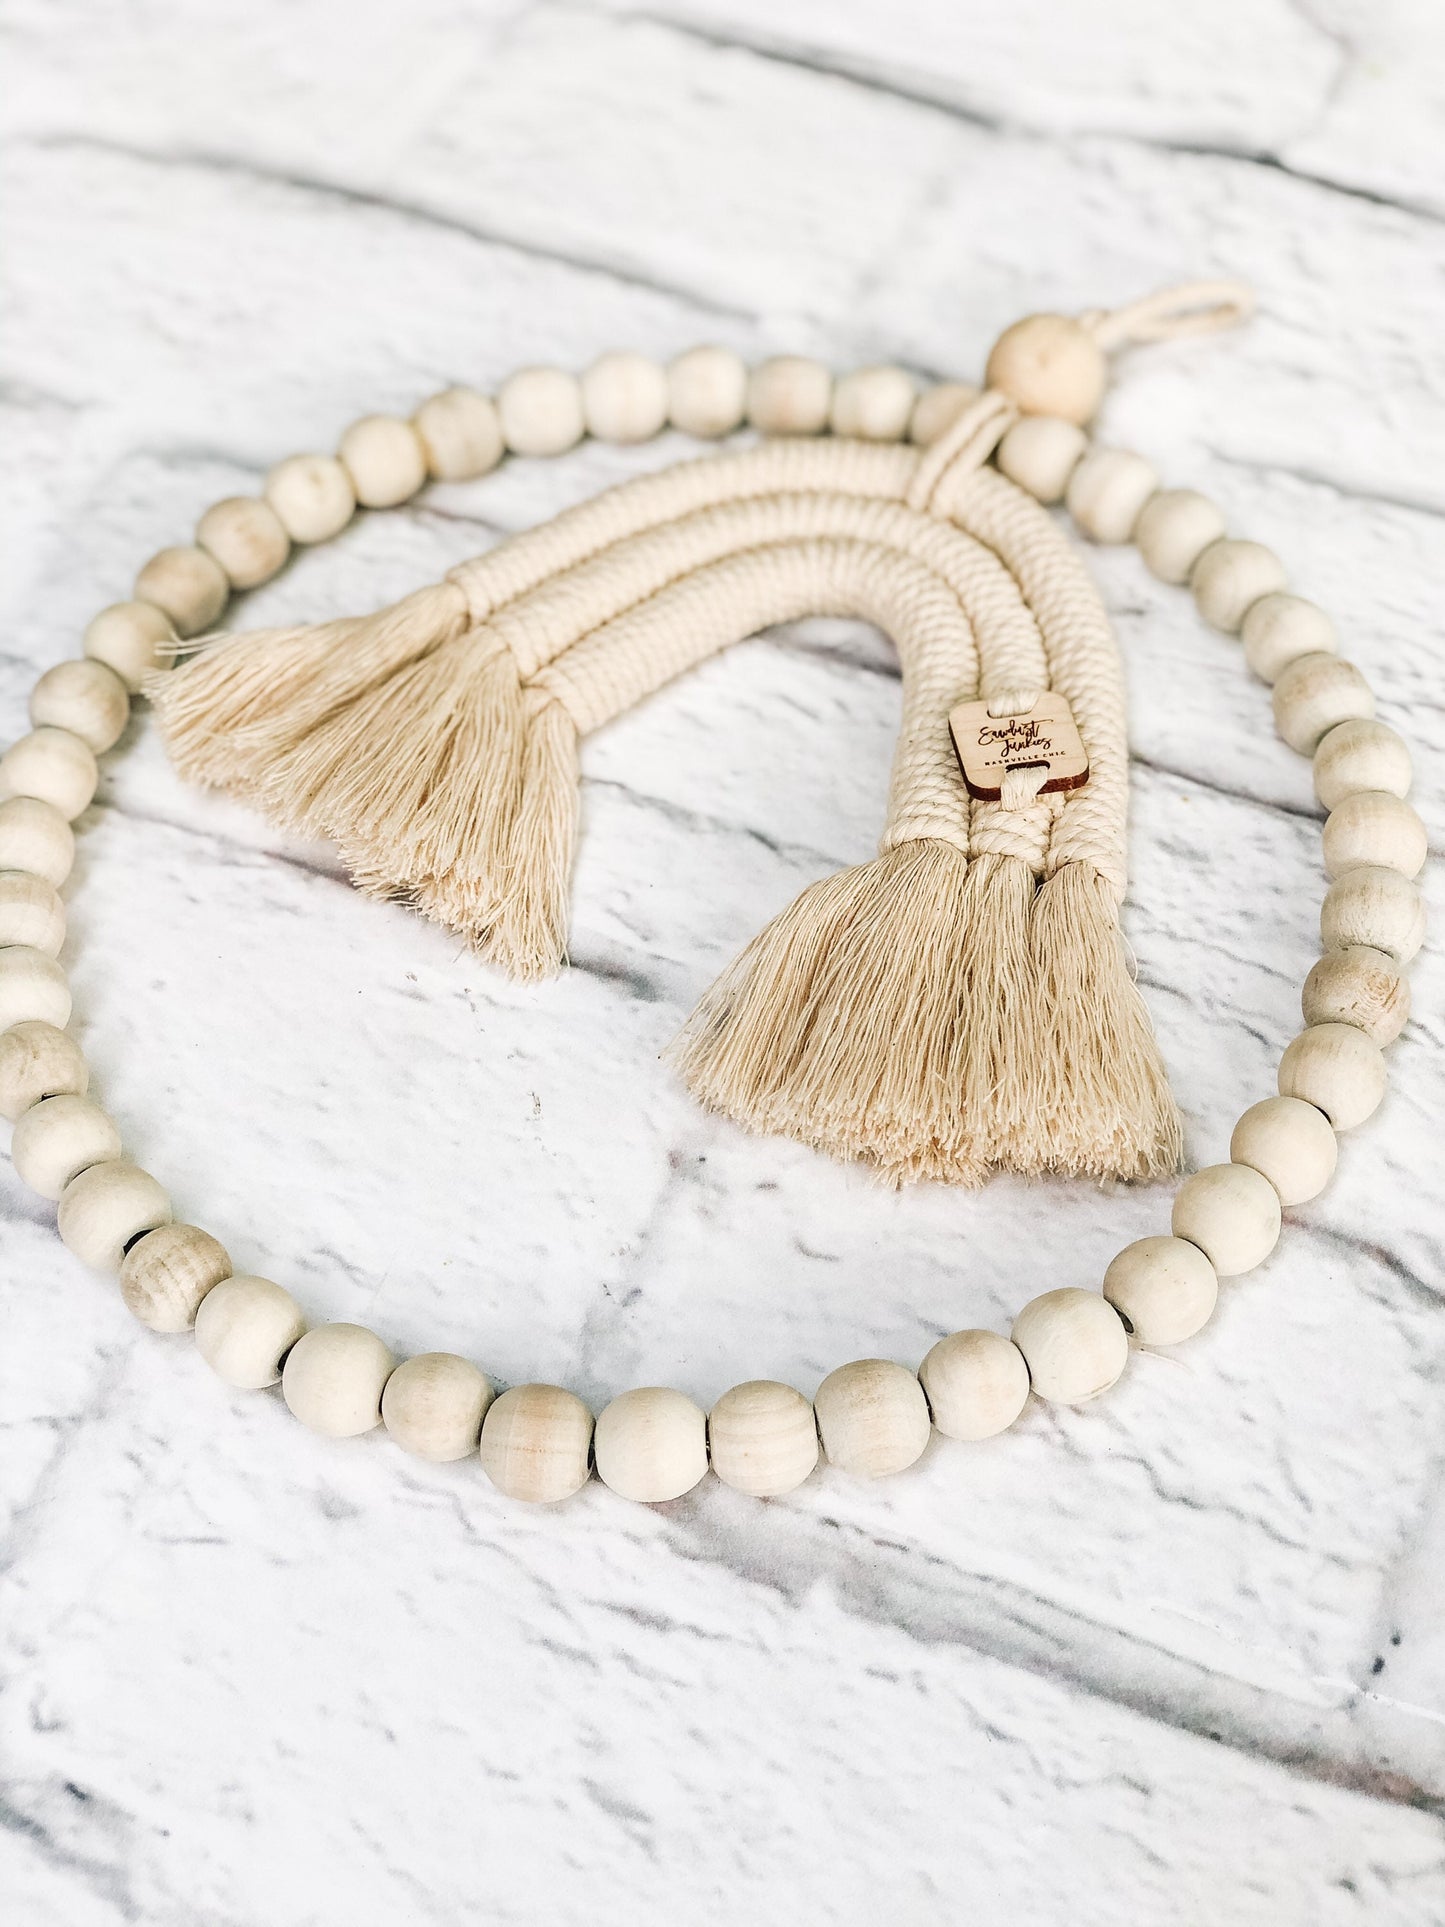 natural macramé rainbow with wooden beads